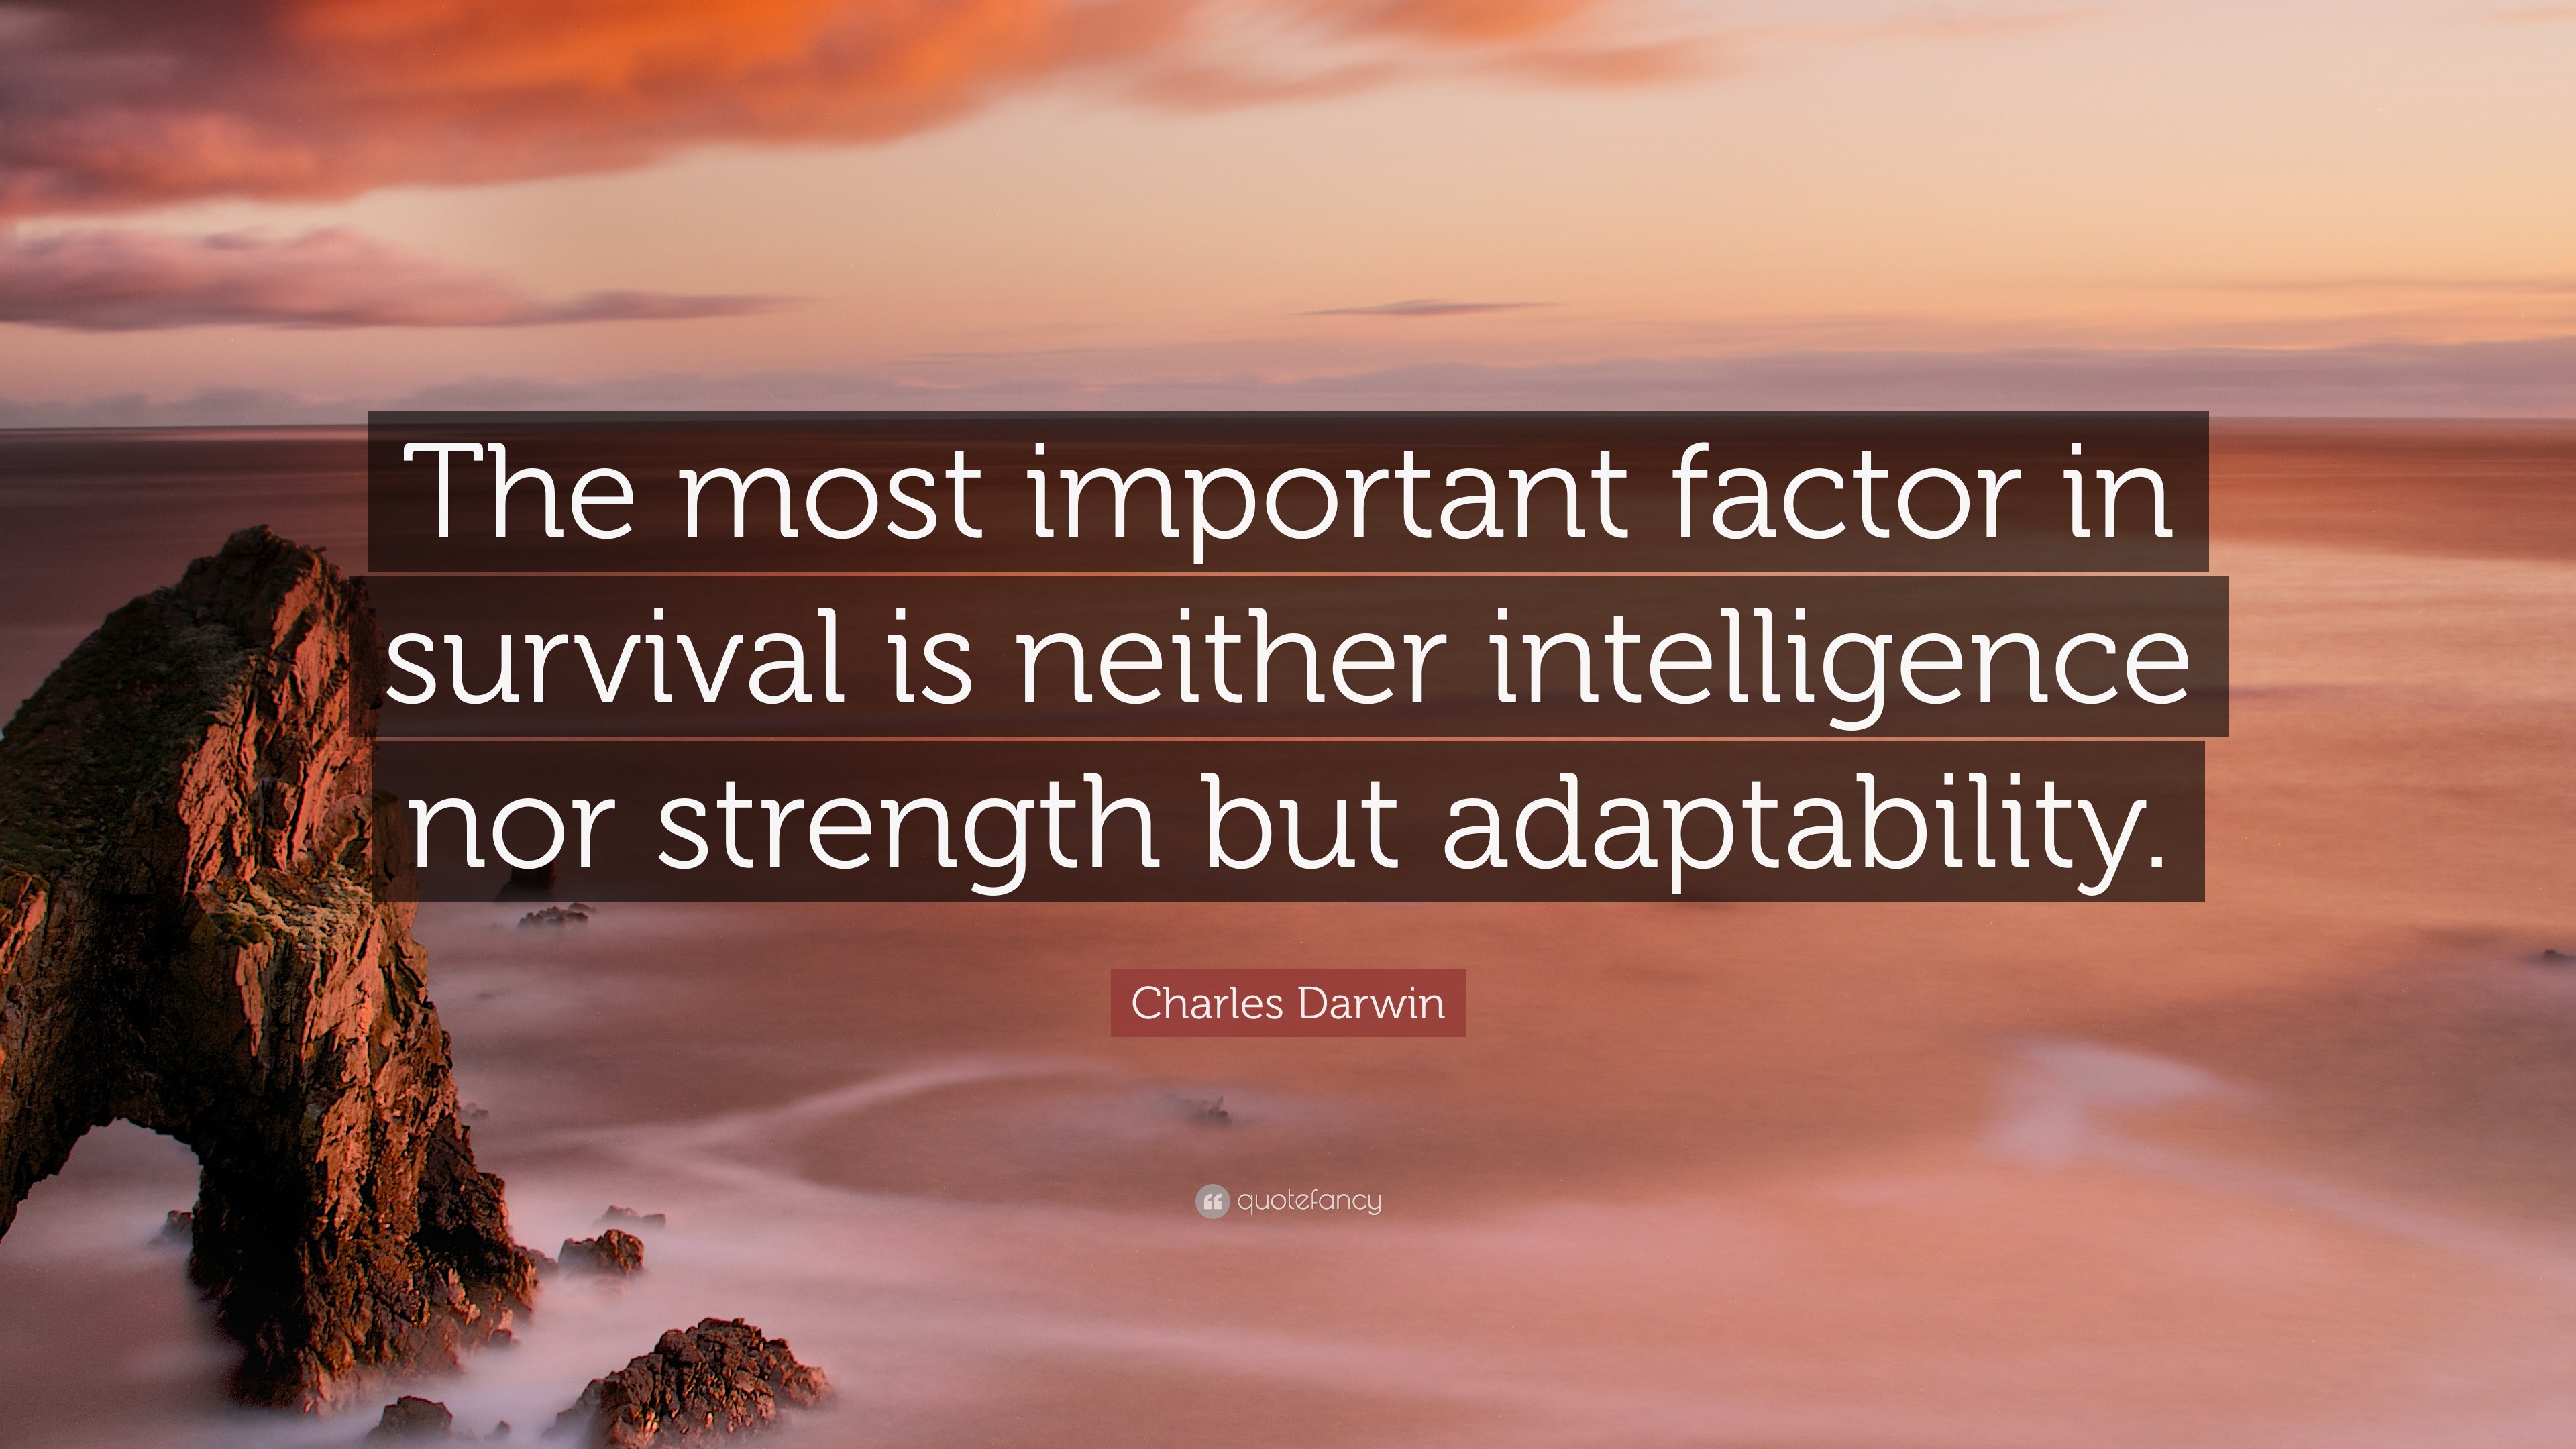 Charles Darwin Quote “The most important factor in